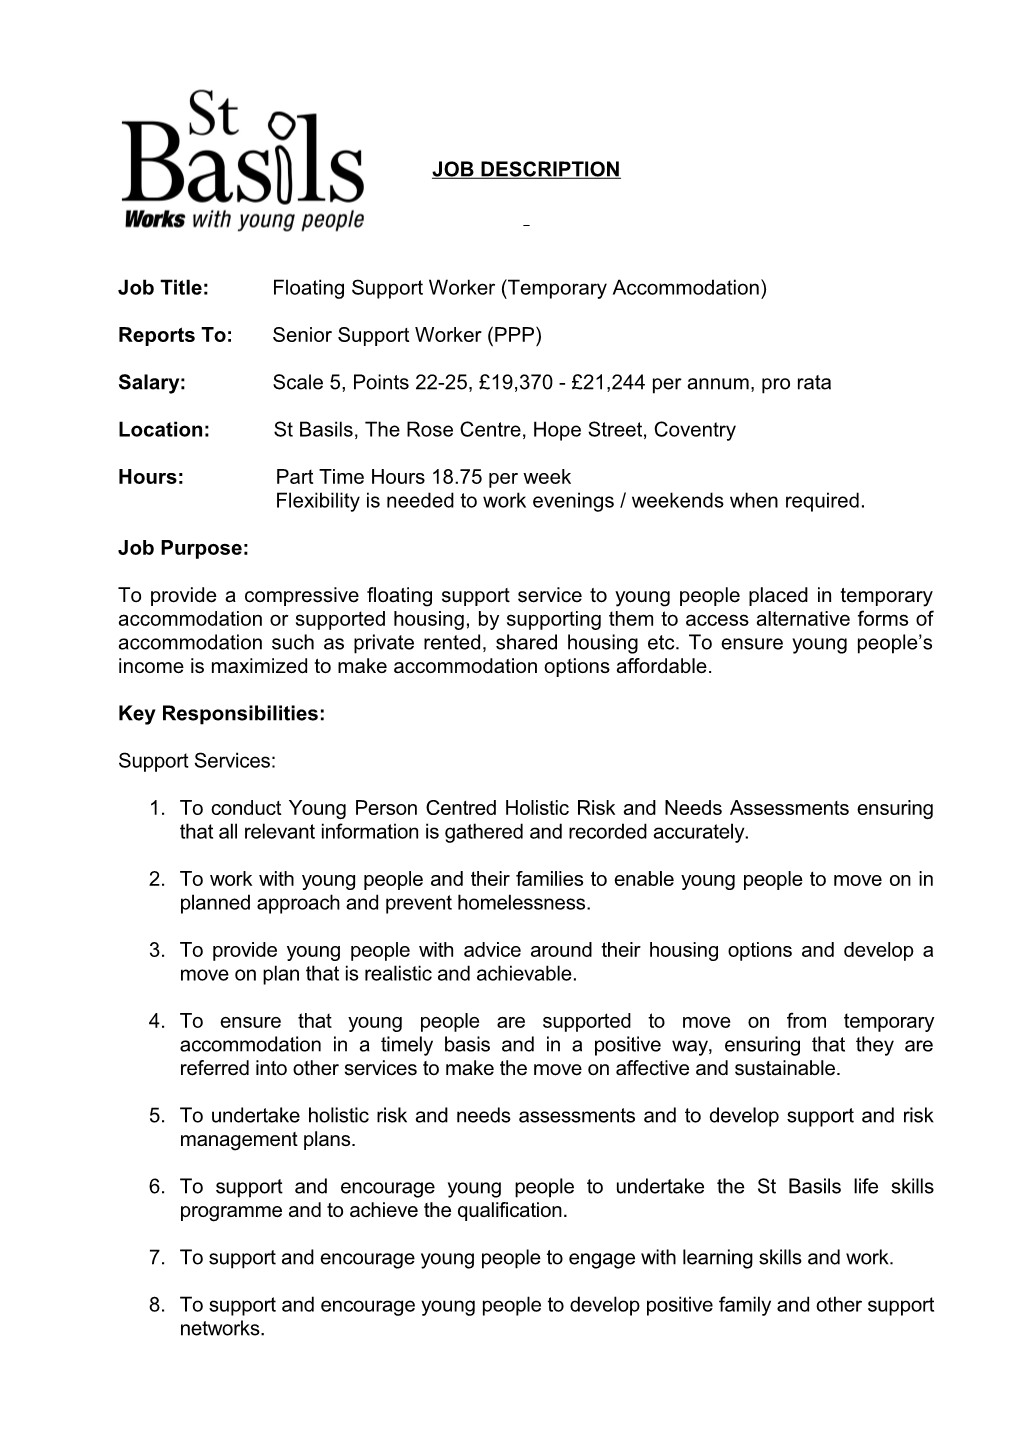 Job Title: Floating Support Worker(Temporaryaccommodation)